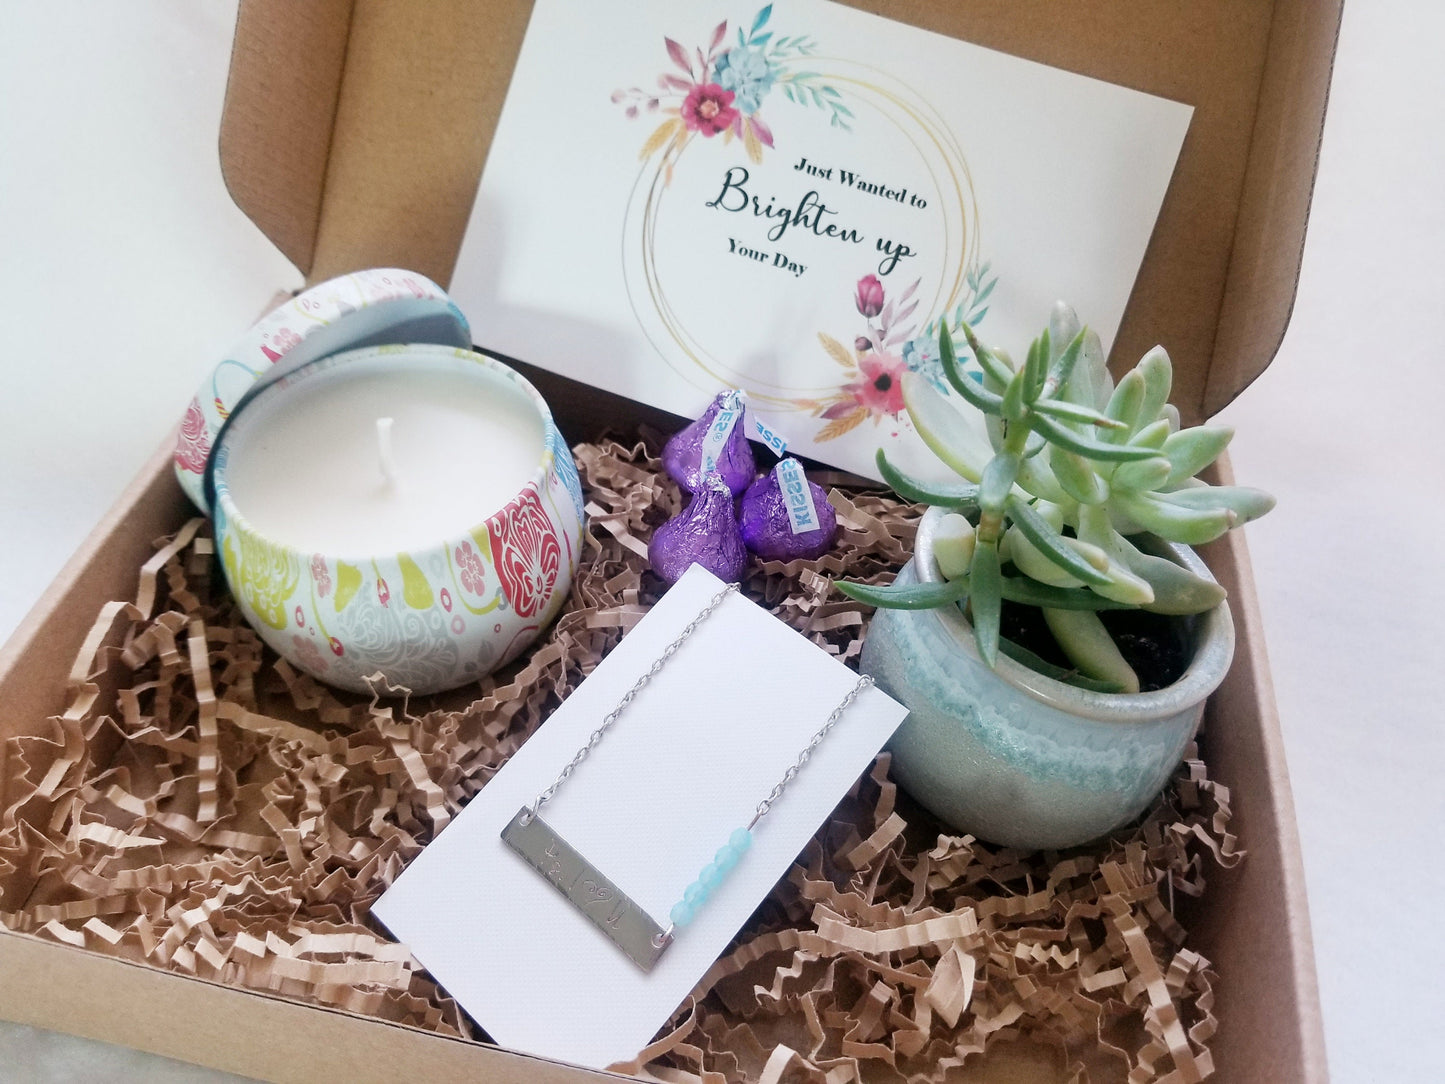 Just wanted to brighten your day - Encouragement care package, Candle, succulent and necklace